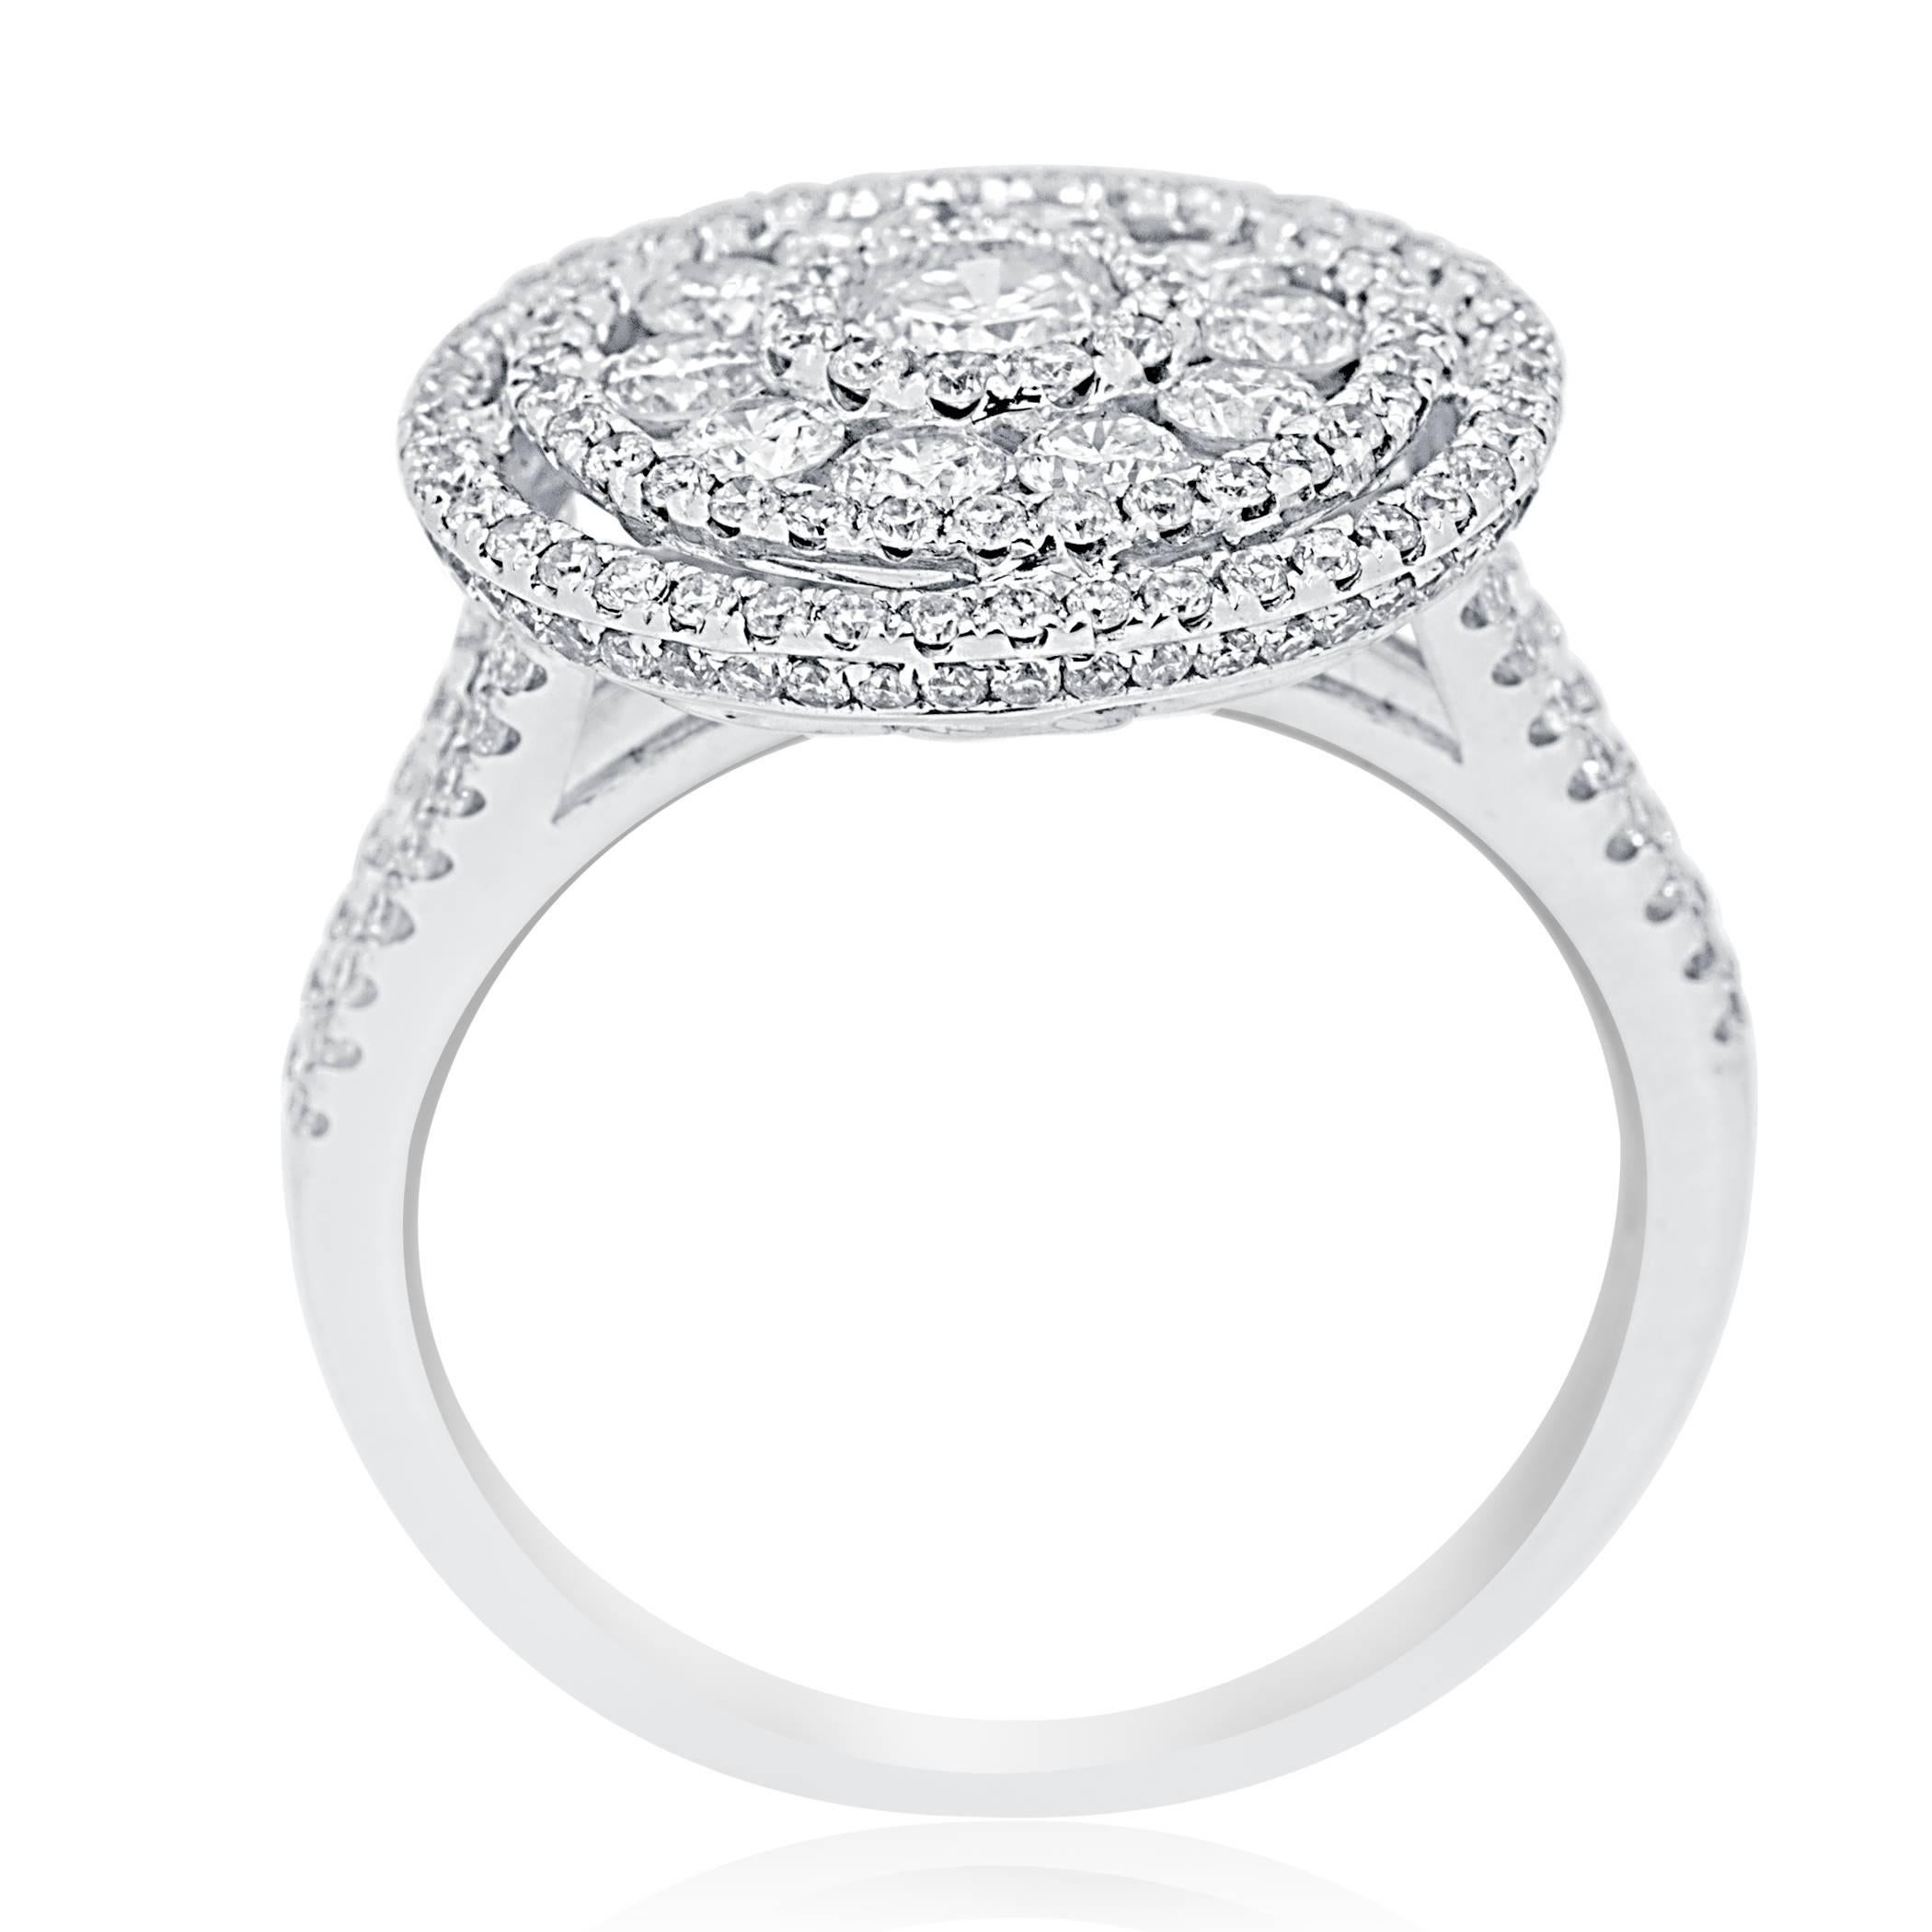 Women's White Diamond Rounds 1.65 Carat Total Weight 14K Gold Fashion Cocktail Ring